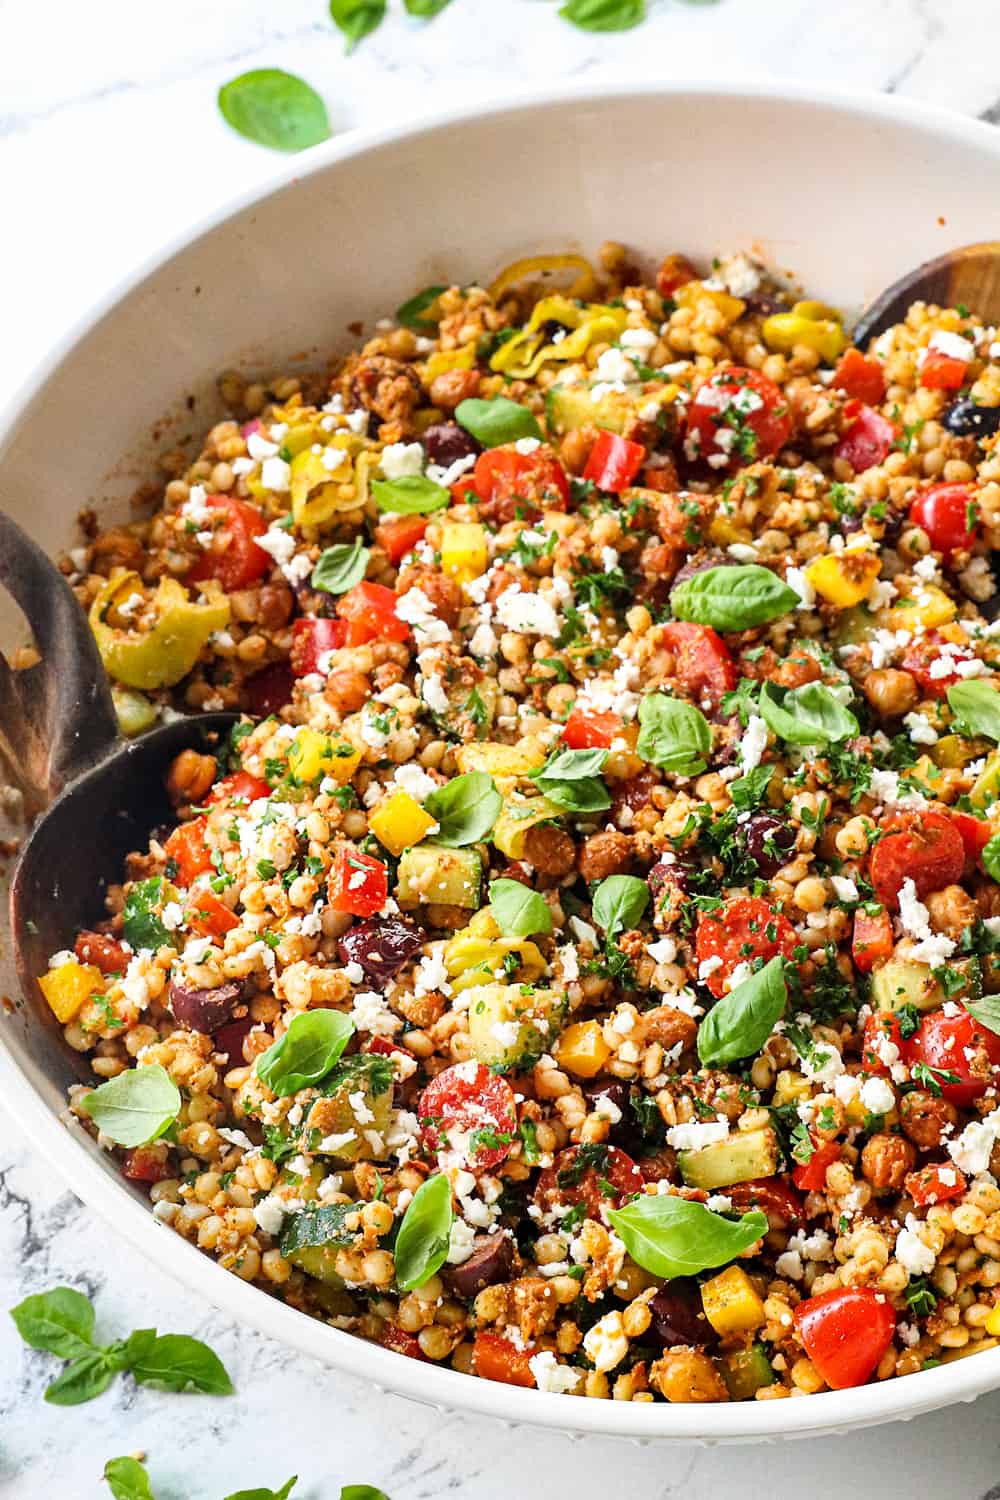 a large bowl of Greek couscous salad recipe with tomatoes, olives, cucumbers, red onions, bell peppers, feta